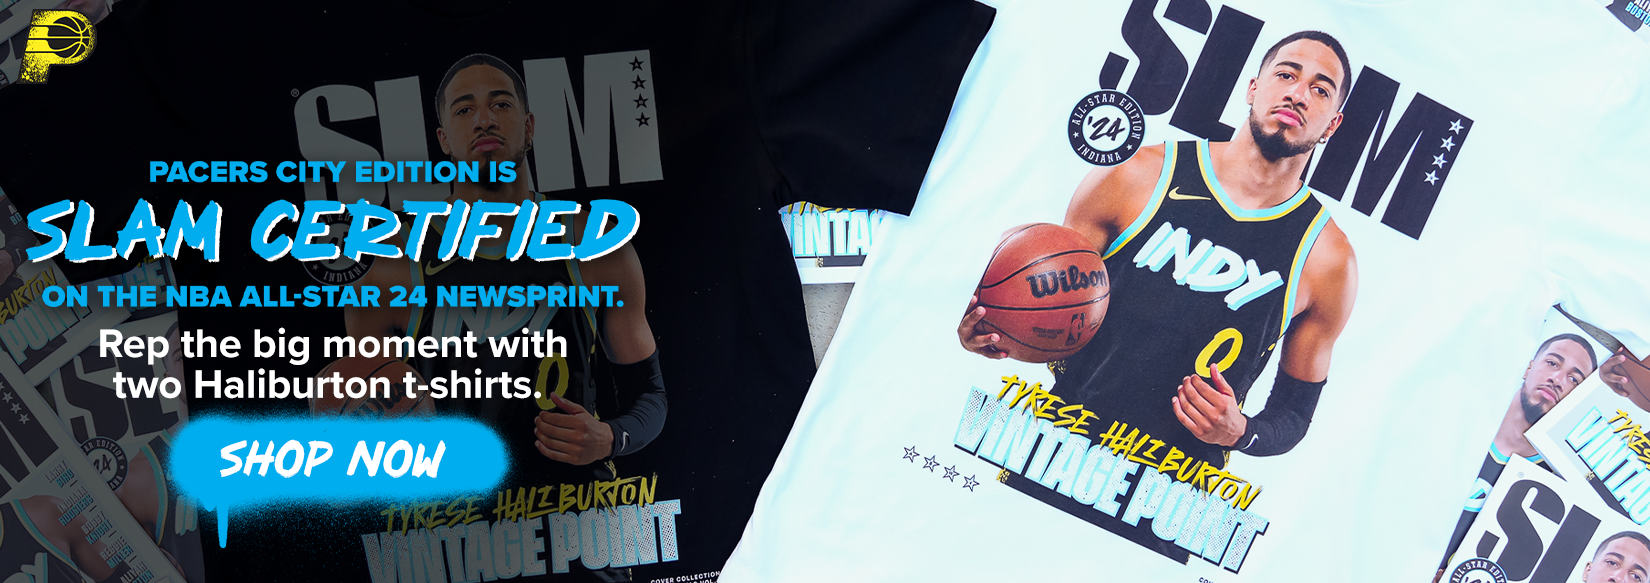 Pacers City Edition Is SLAM Certified On The NBA All-Star 24 Newsprint. Rep the big moment with two Haliburton t-shirts. SHOP NOW